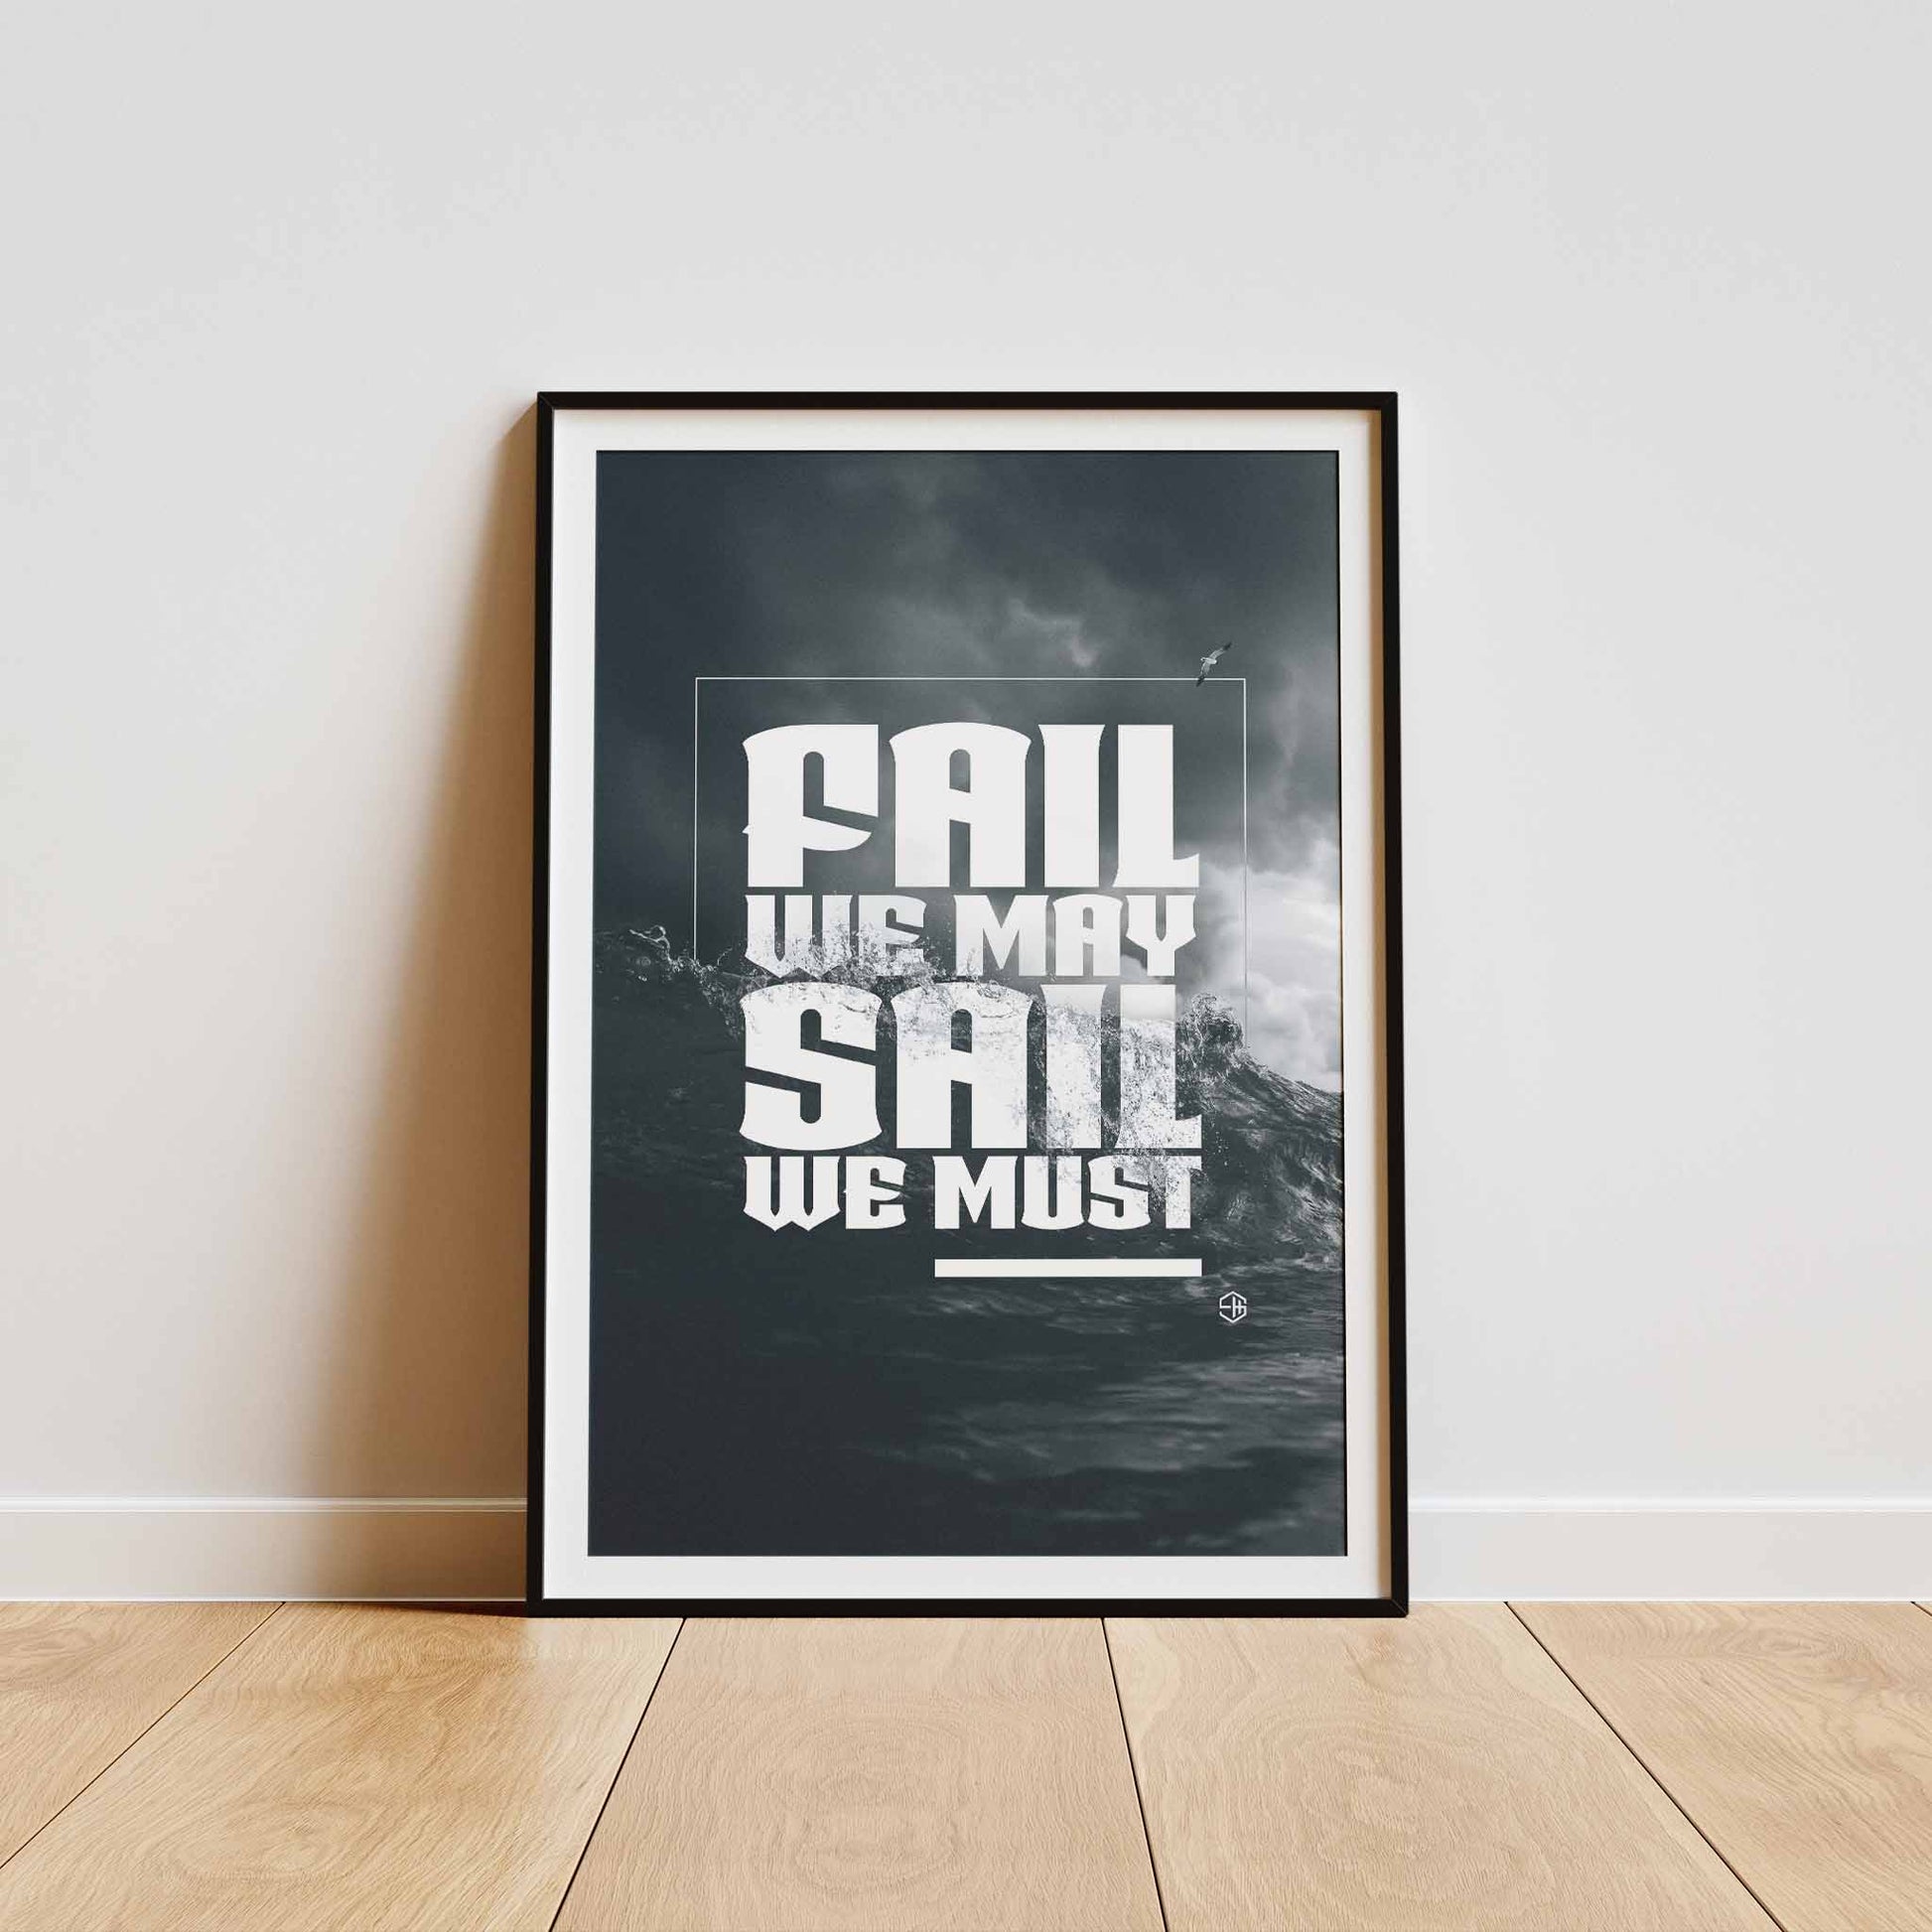 Fail We May, Sail We Must Andrew Weatherall Poster